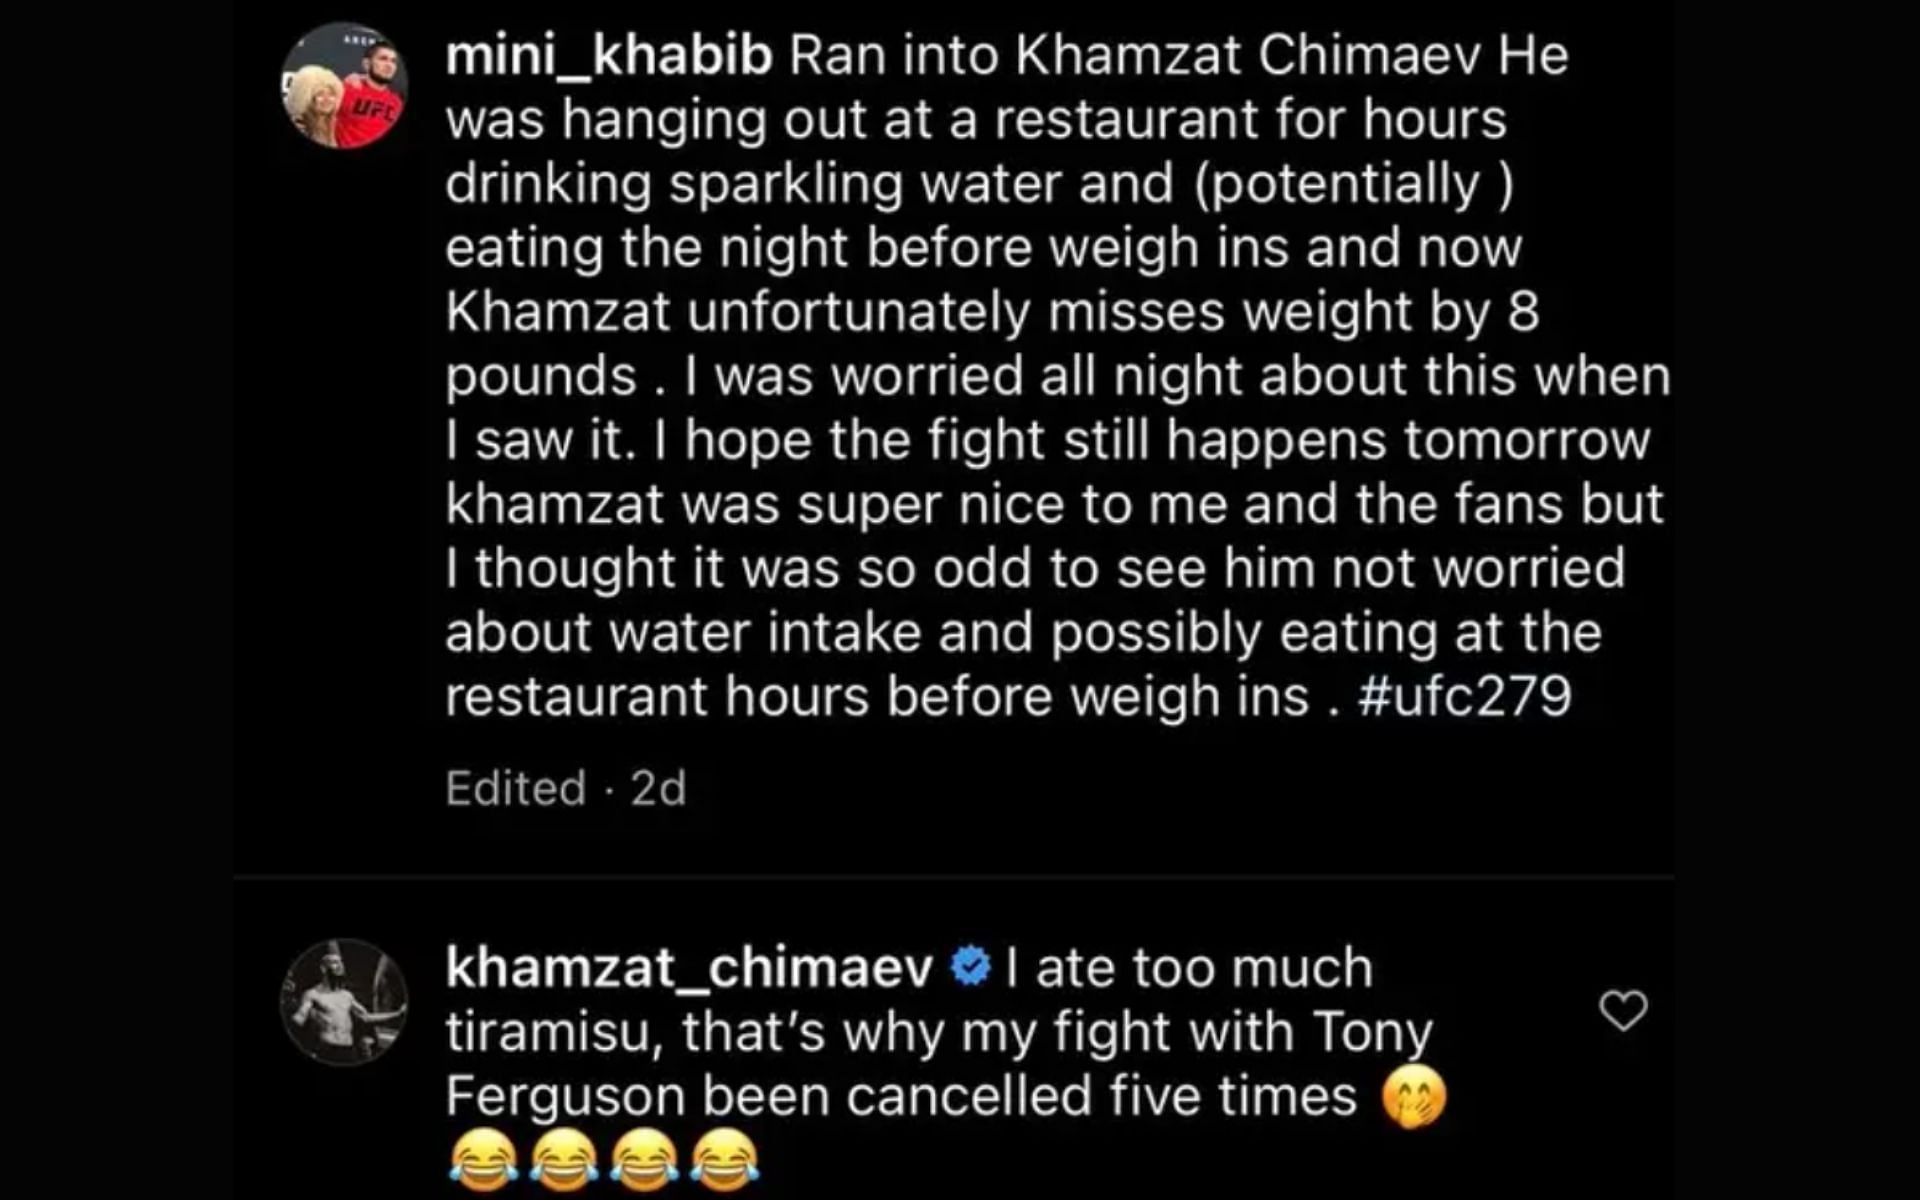 Khamzat Chimaev deleted a reply that was meant to respond to Khabib Nurmagomedov&#039;s comments.